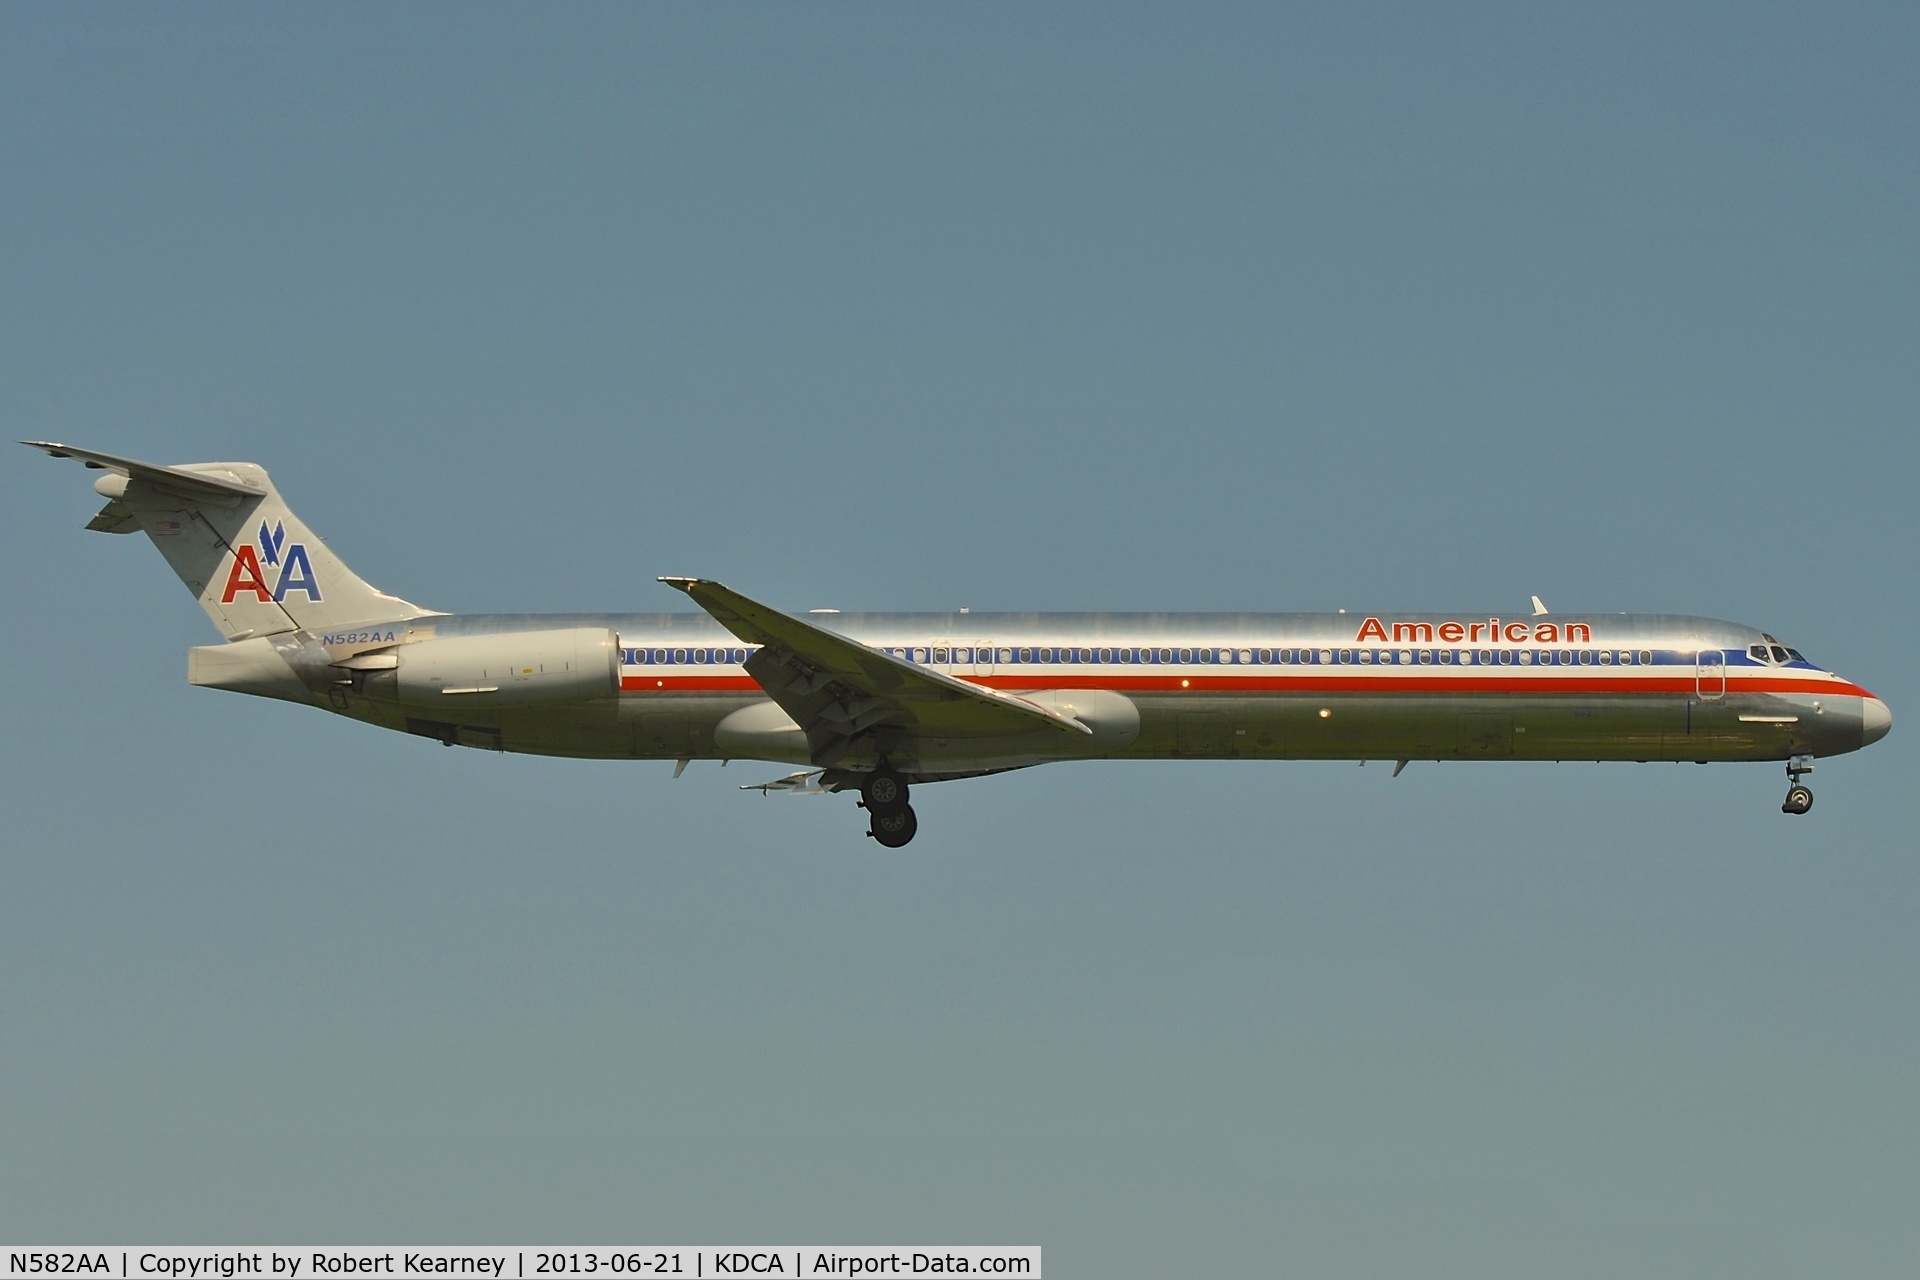 N582AA, 1991 McDonnell Douglas MD-82 (DC-9-82) C/N 53159, On short finals for r/w 19